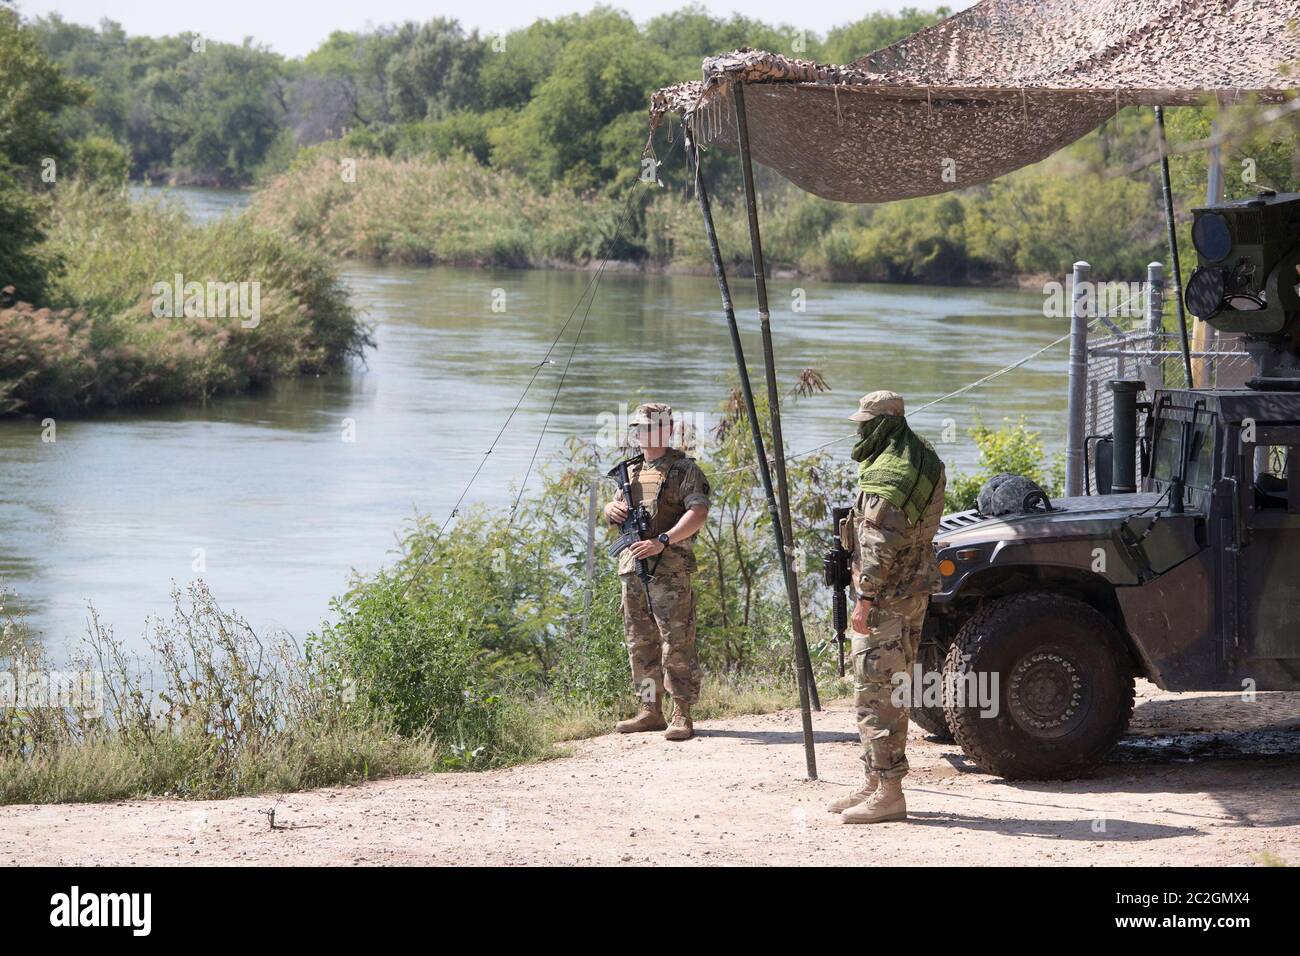 Roma Texas April 13, 2018: Texas National Guard troops man a observation post along the Rio Grande River as it flows southward between the bluffs of Roma and the Mexican city of Ciudad Miguel Aleman to the left.  Over a thousand National Guard troops were called up to enhance border security in Texas. ©Bob Daemmrich Stock Photo